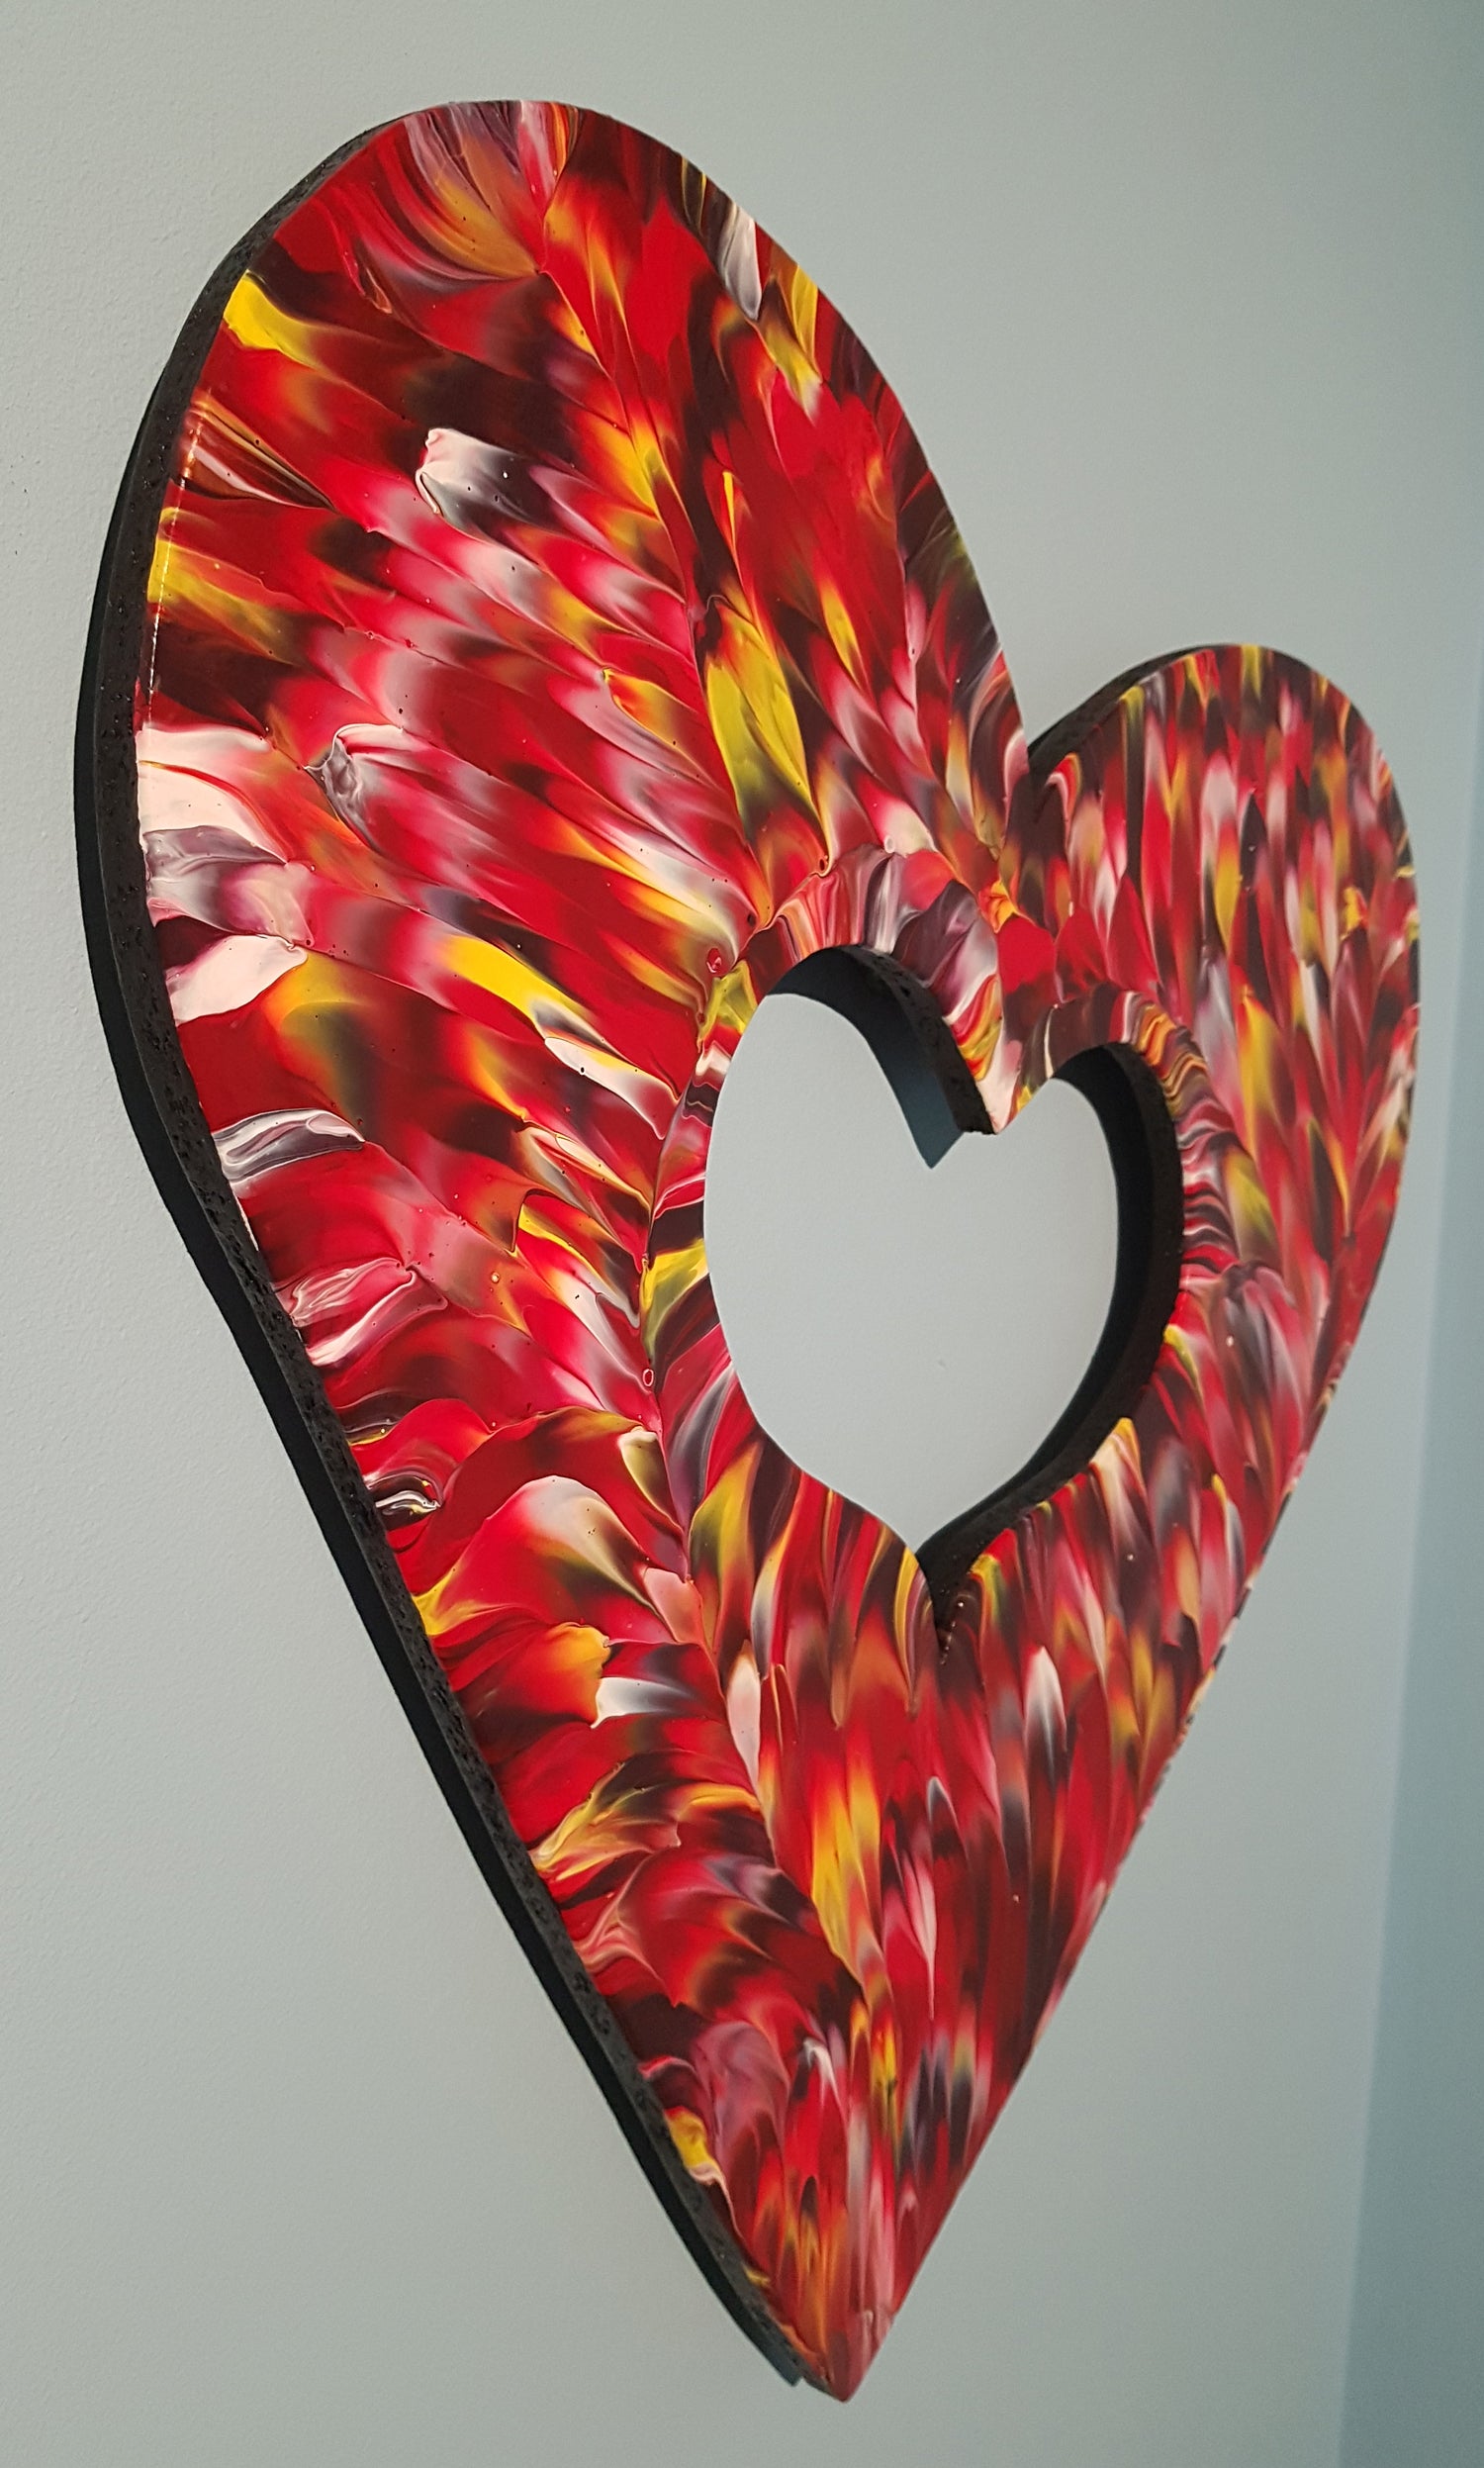 I-Love-You-With-All-My-Art-by-Alexandra-Romano-Unique-Abstracts-Red-Heart-Shaped-Custom-Made-Paintings-Toronto-Art